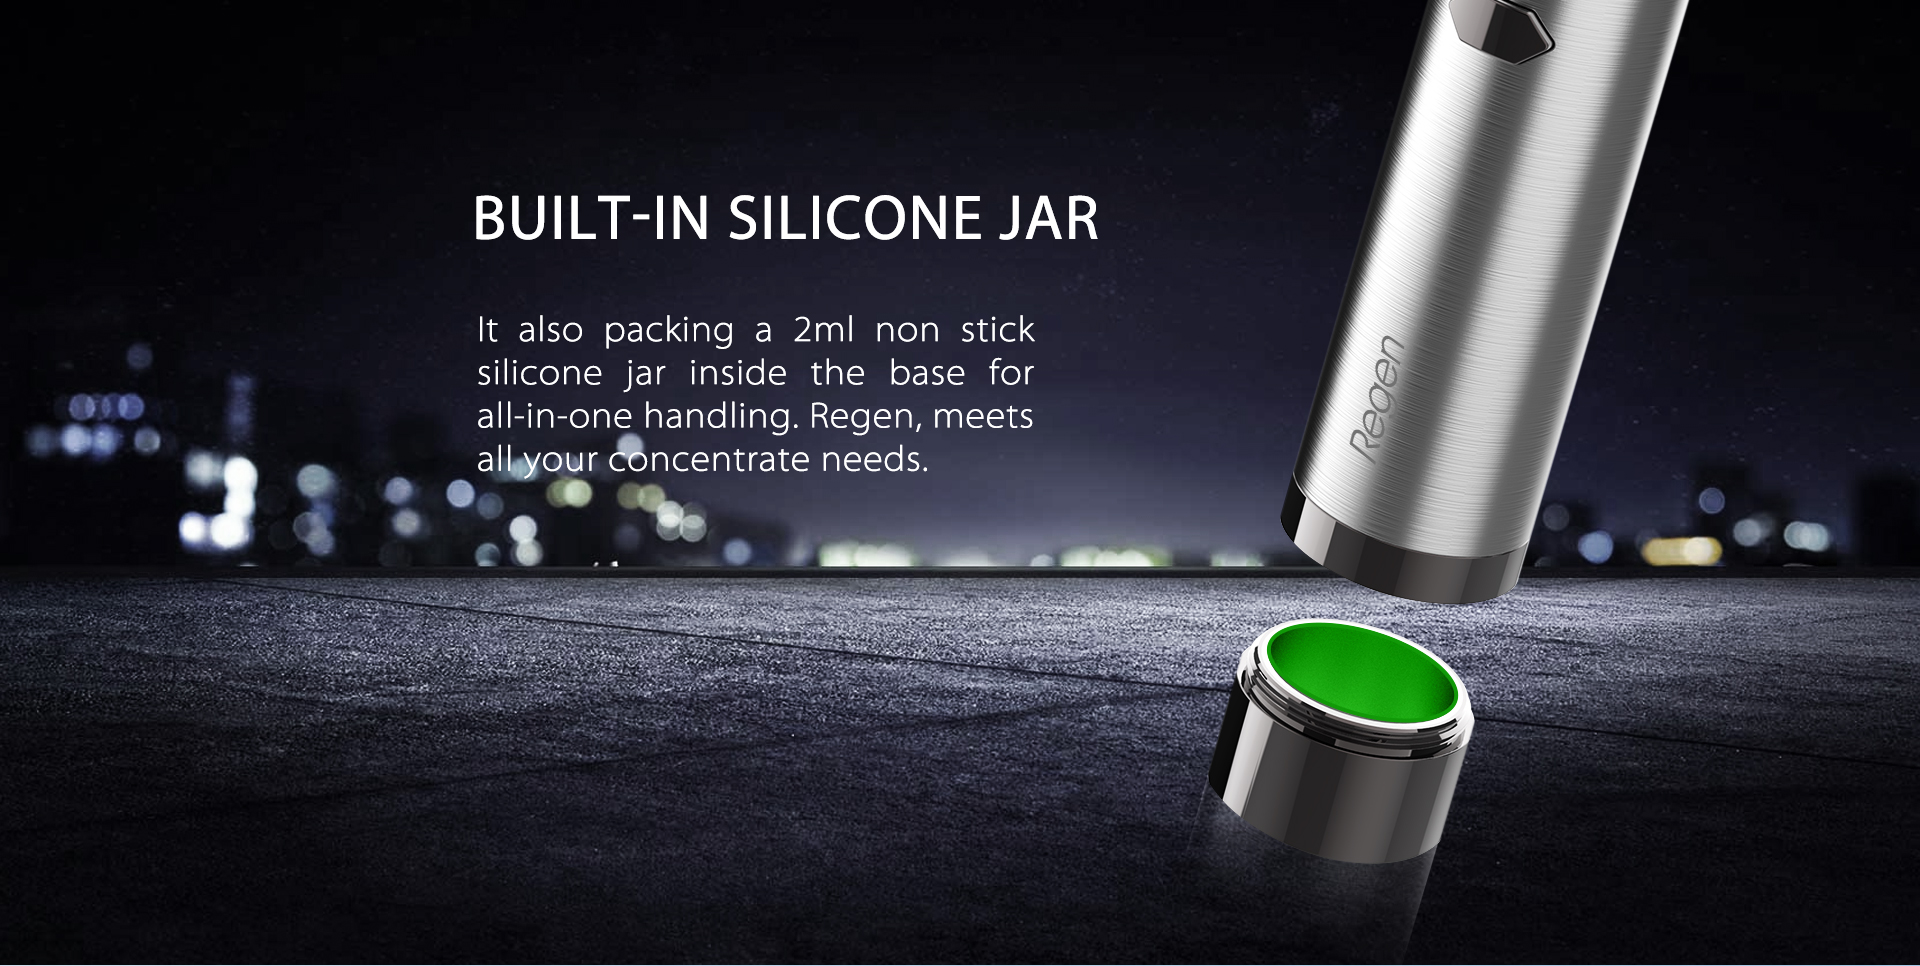 Yocan Regen vaporizer pen come with a stick silicone jar, meets all your concentrate needs.